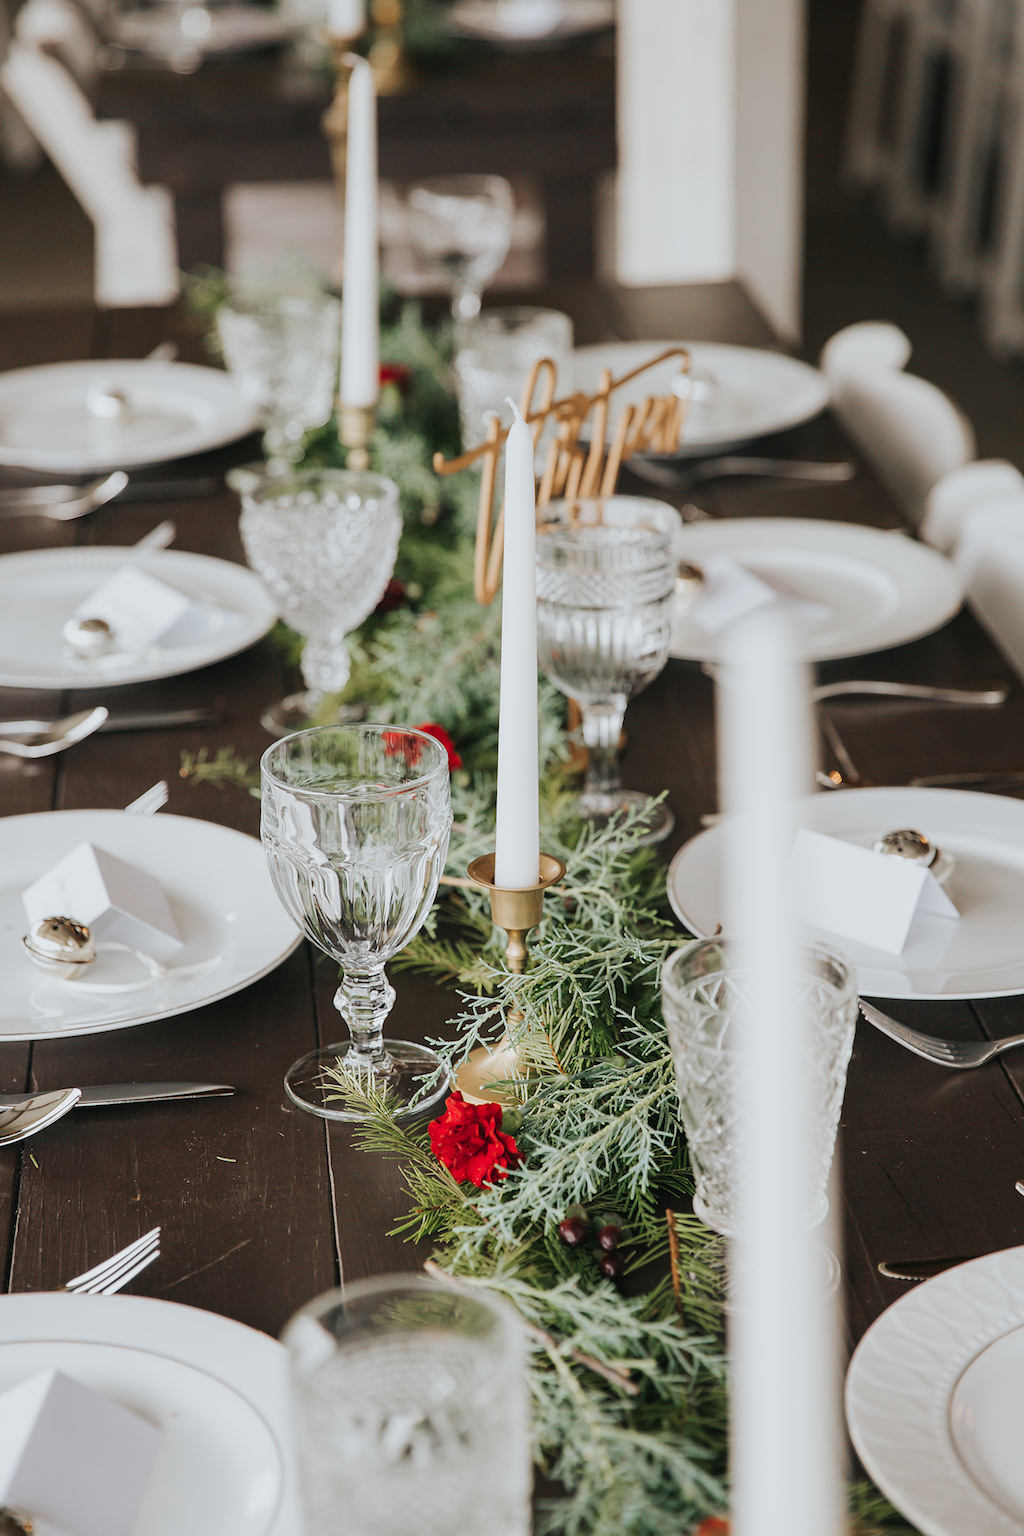 Romantic Christmas Inspired Wedding Decor Centerpieces with Wooden Farm Table, Crystal Goblets, Gold Candelabra, White Candlesticks, Garland Greenery with Red Florals